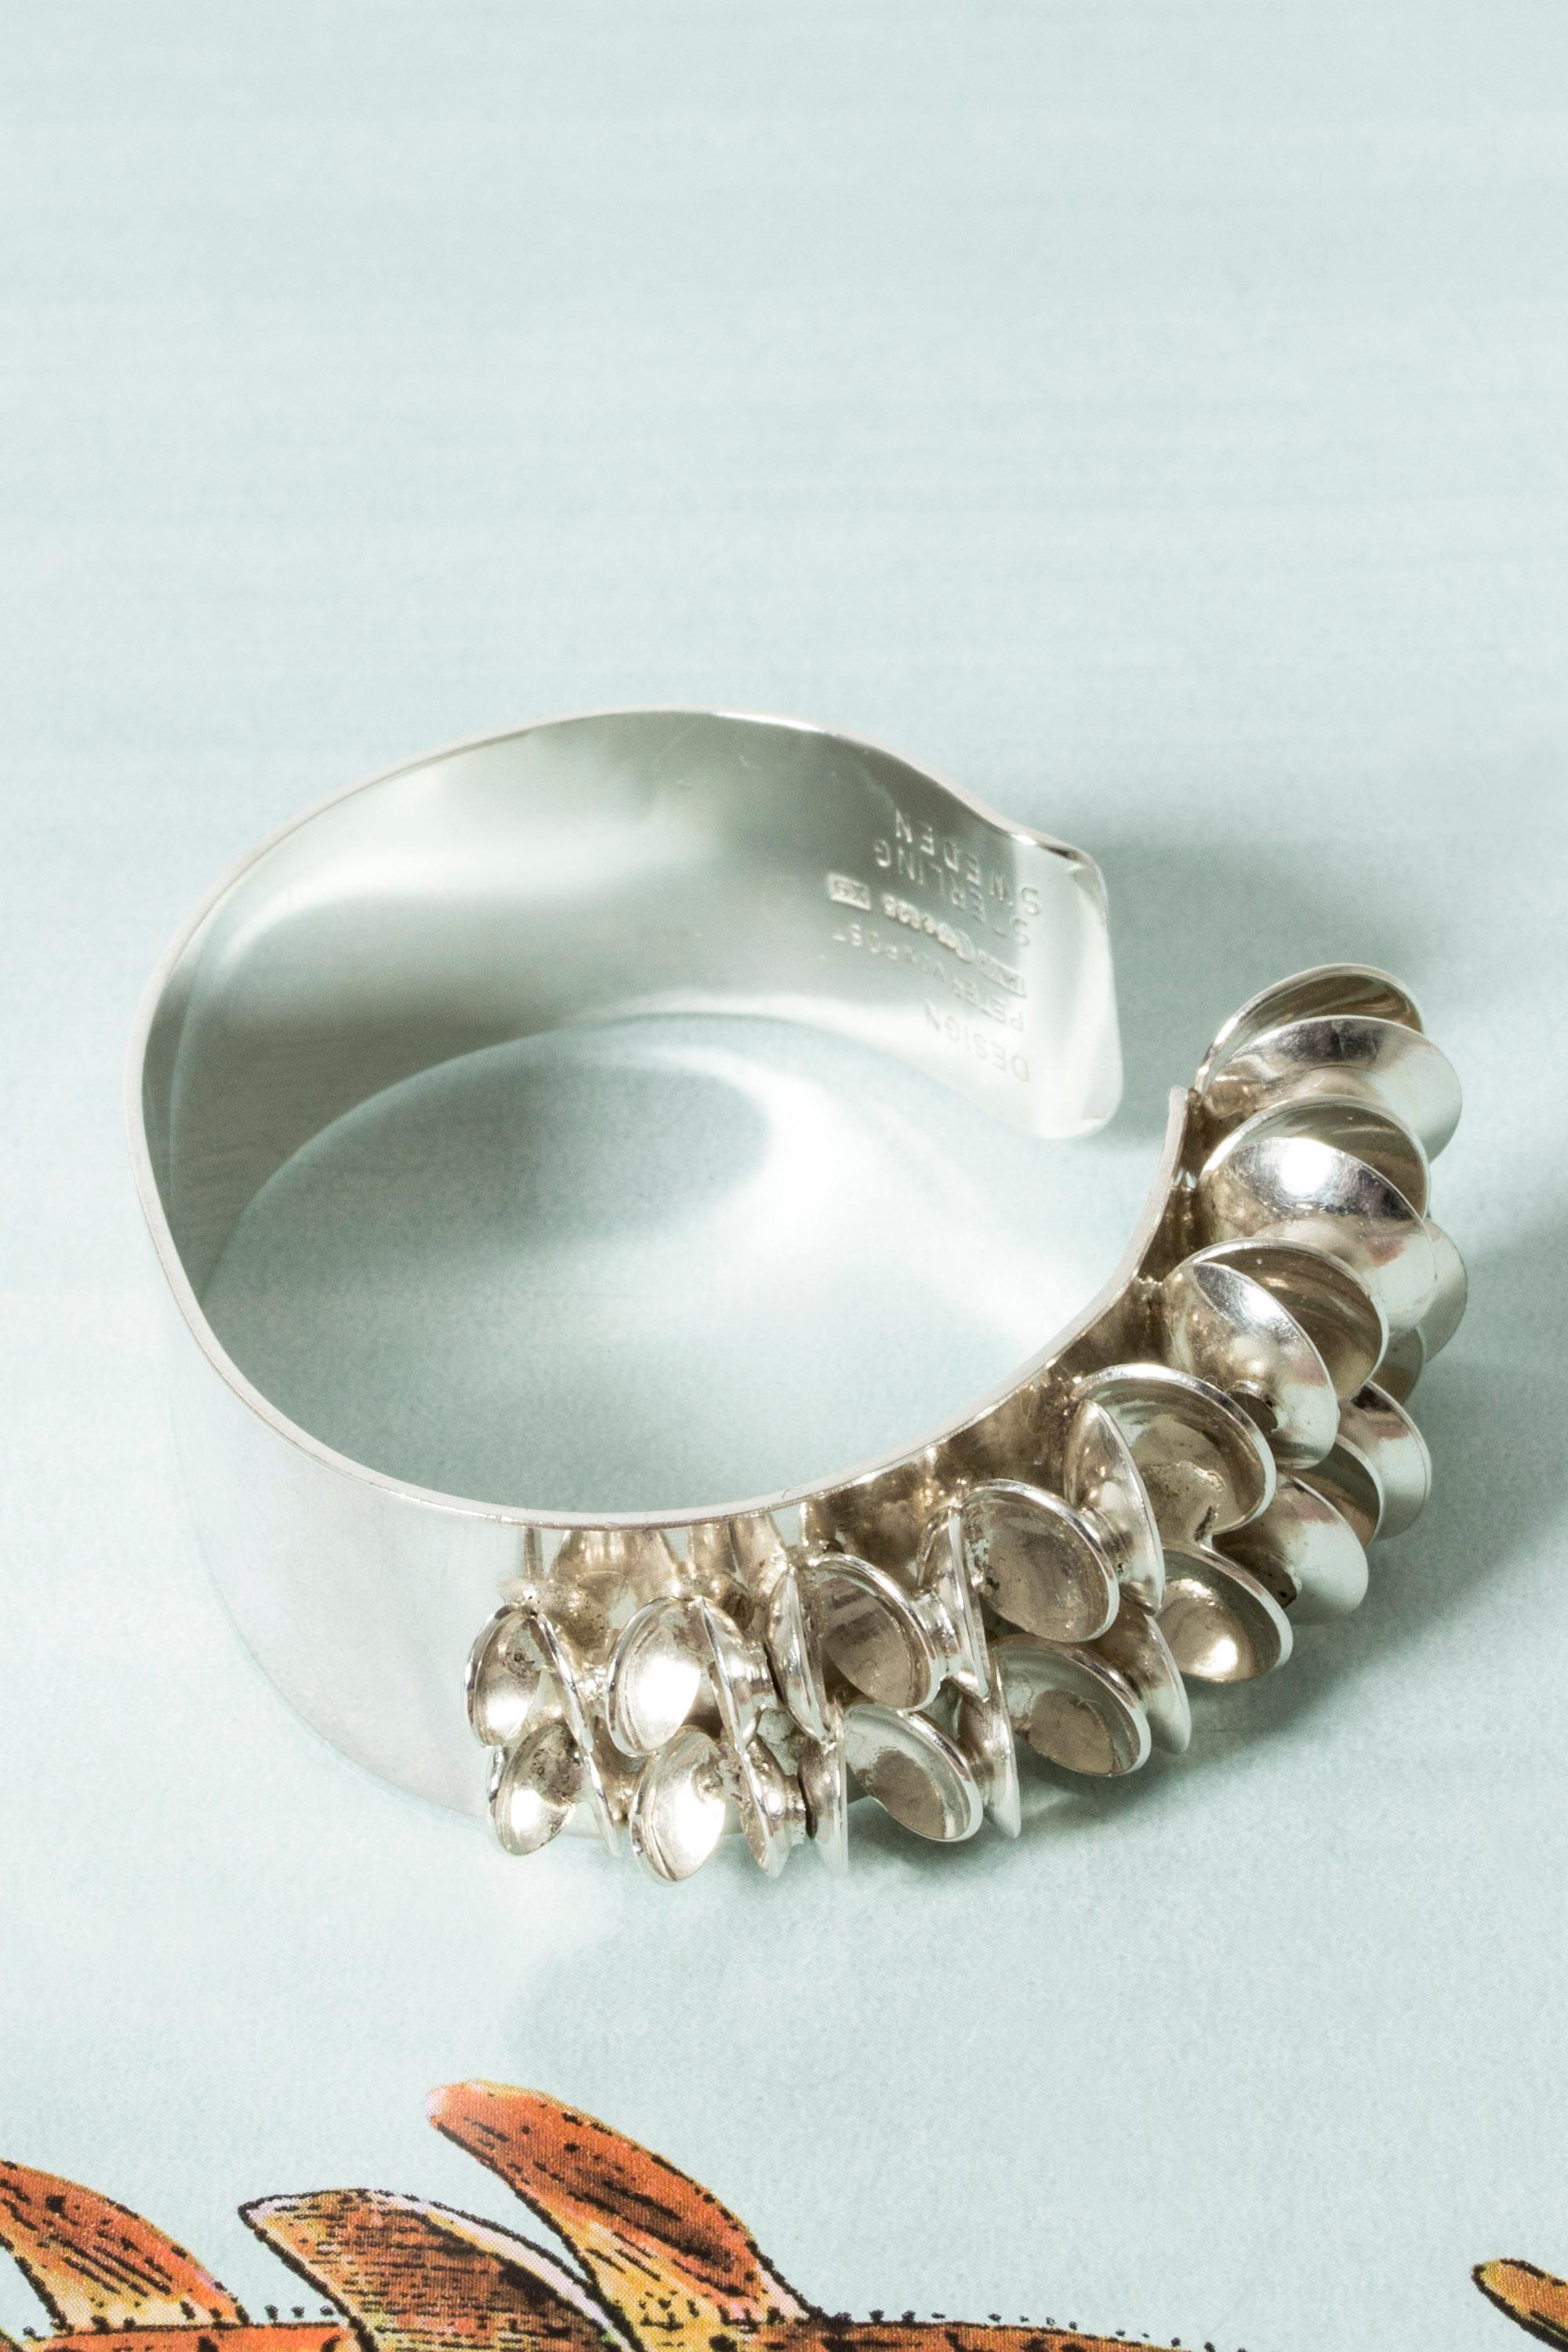 Beautiful silver bracelet by Peter von Post with a decor of clustered shells. A rare, unique design, exquisitely made.